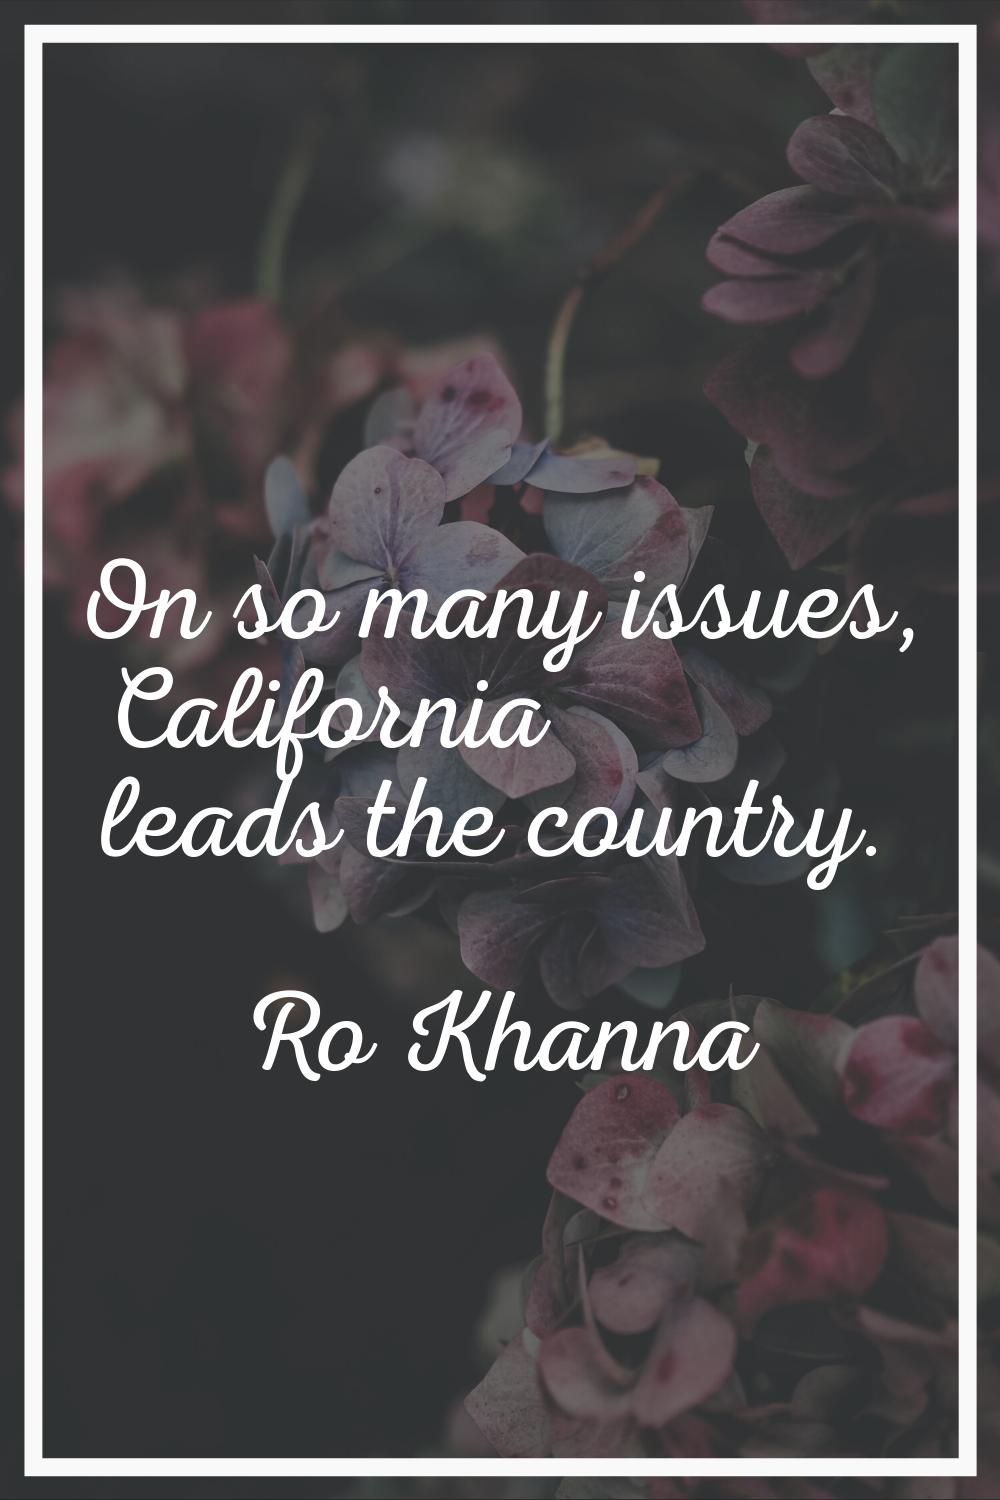 On so many issues, California leads the country.